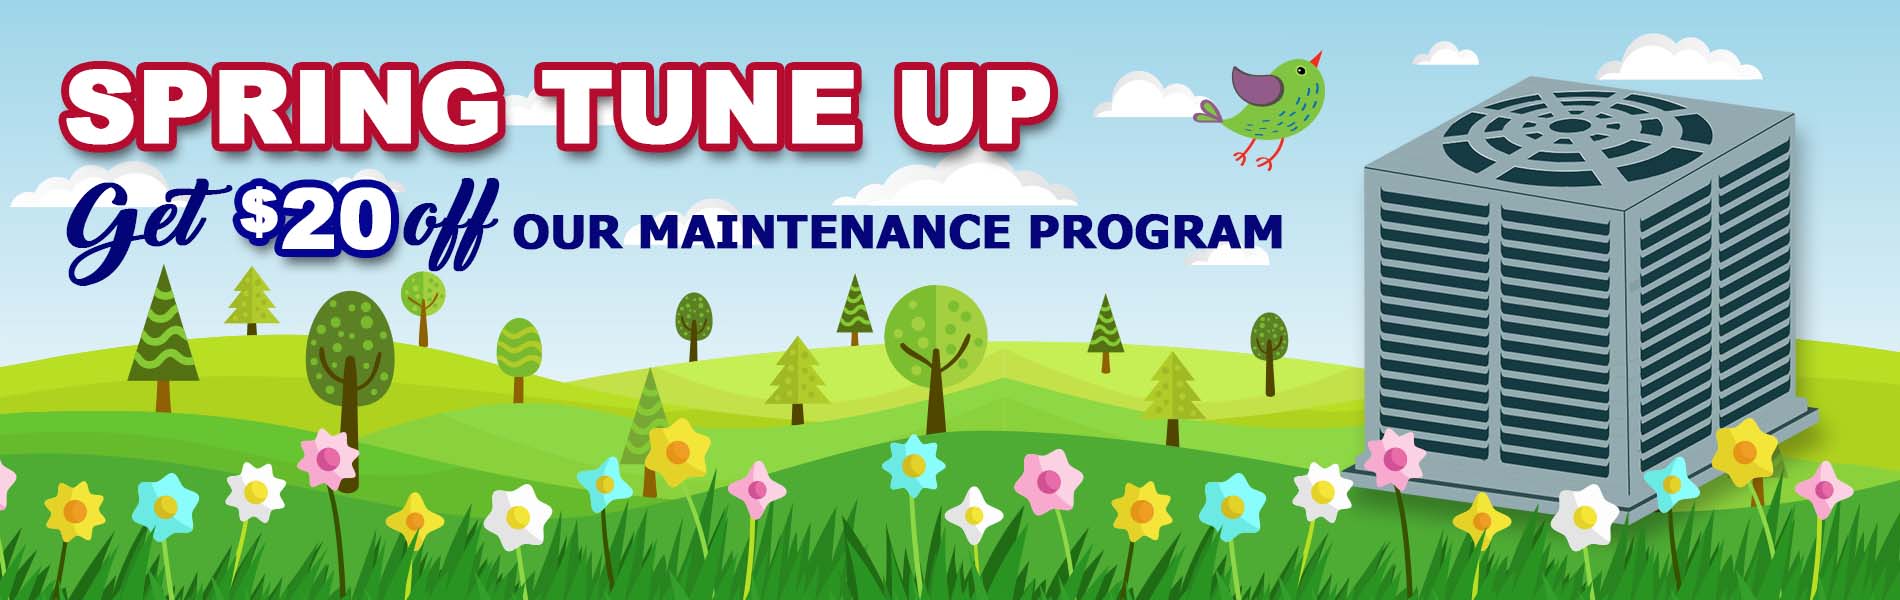 Spring Tune Up